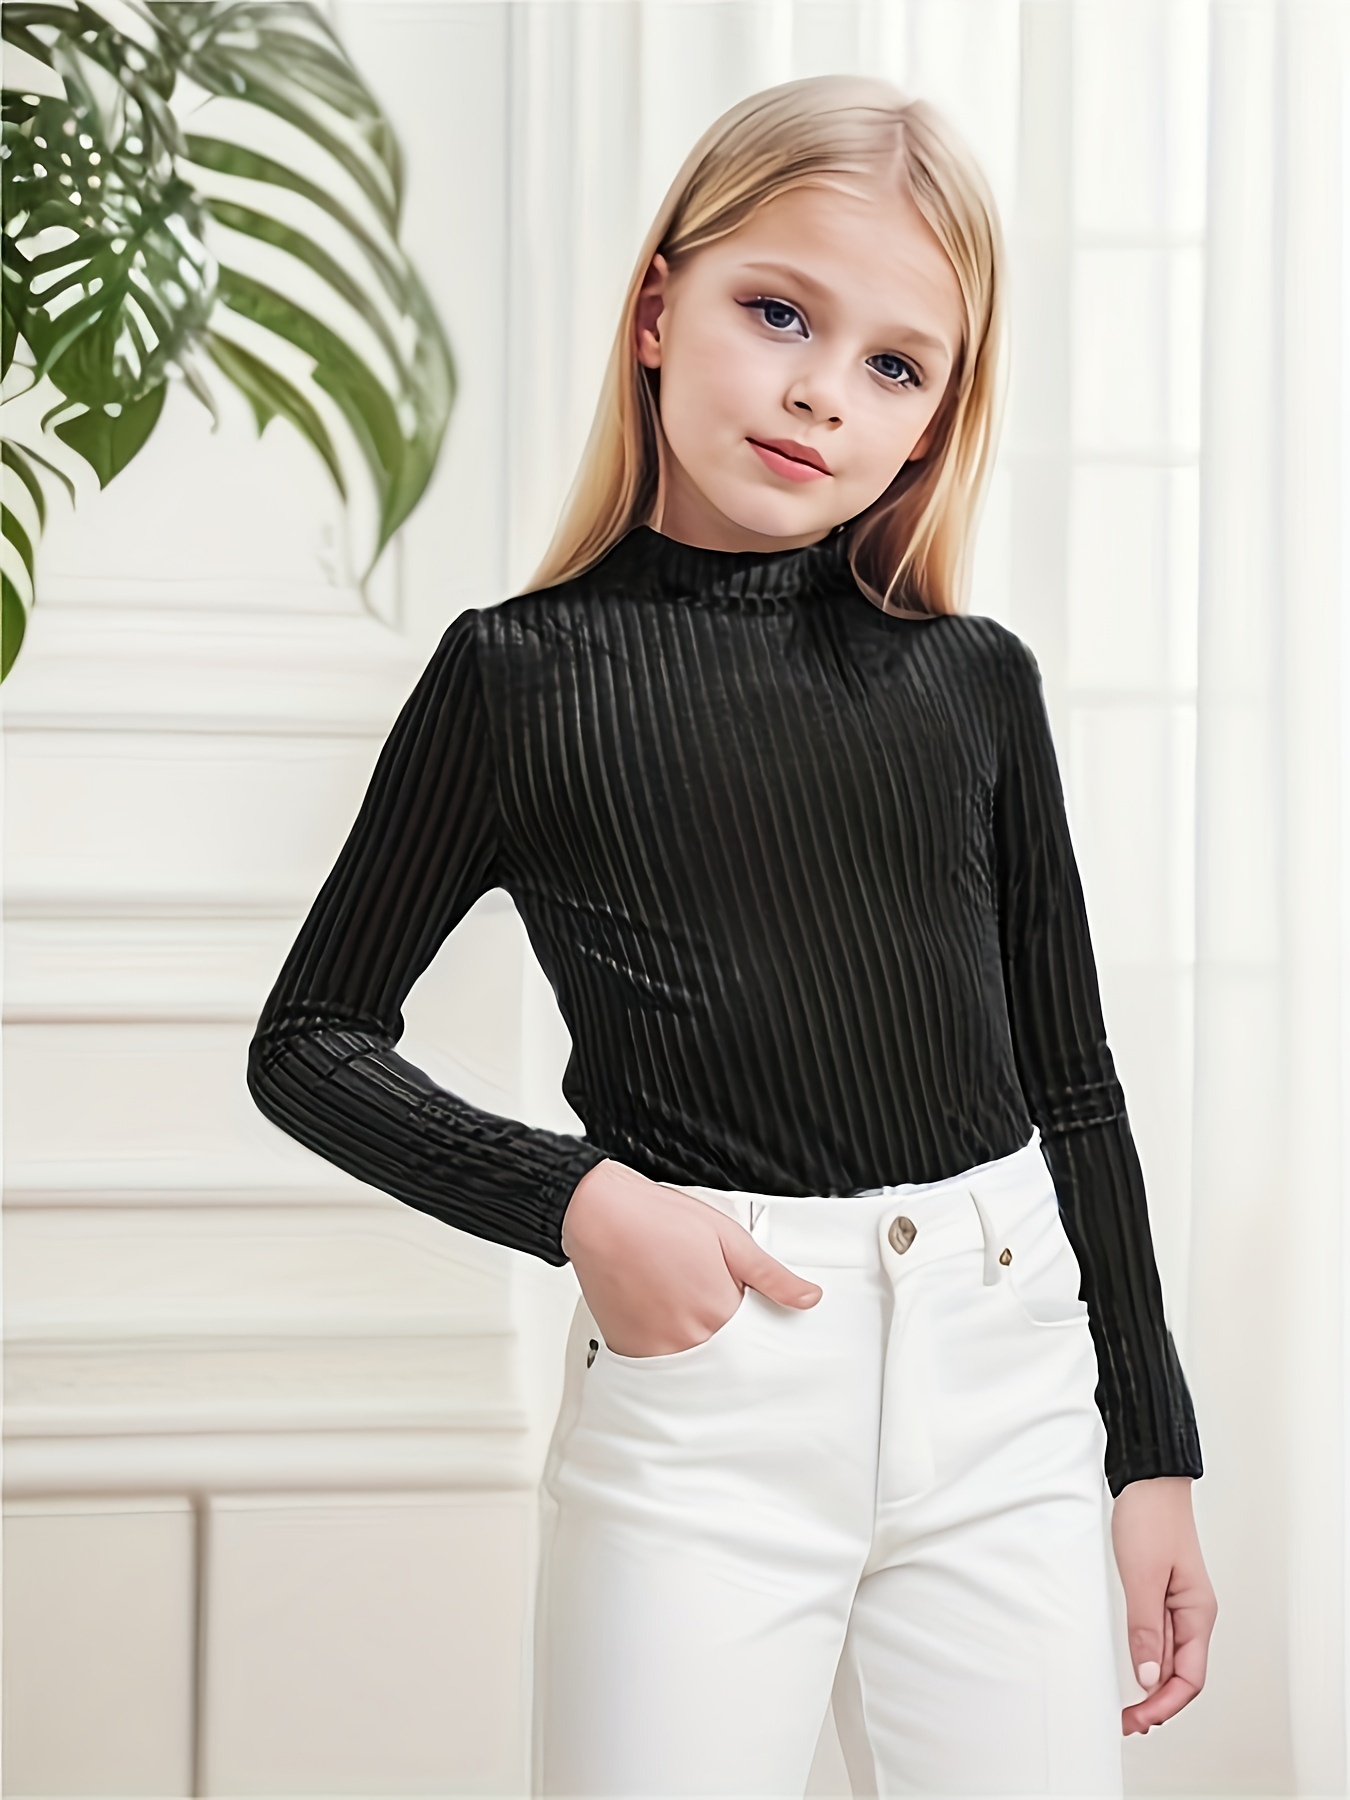 Kids Girls Black Crop Top with Elastic Waistband Chain Pants Long Sleeve  Mock Neck Lace-up Clothes for Jazz Hip Hop Street Dance